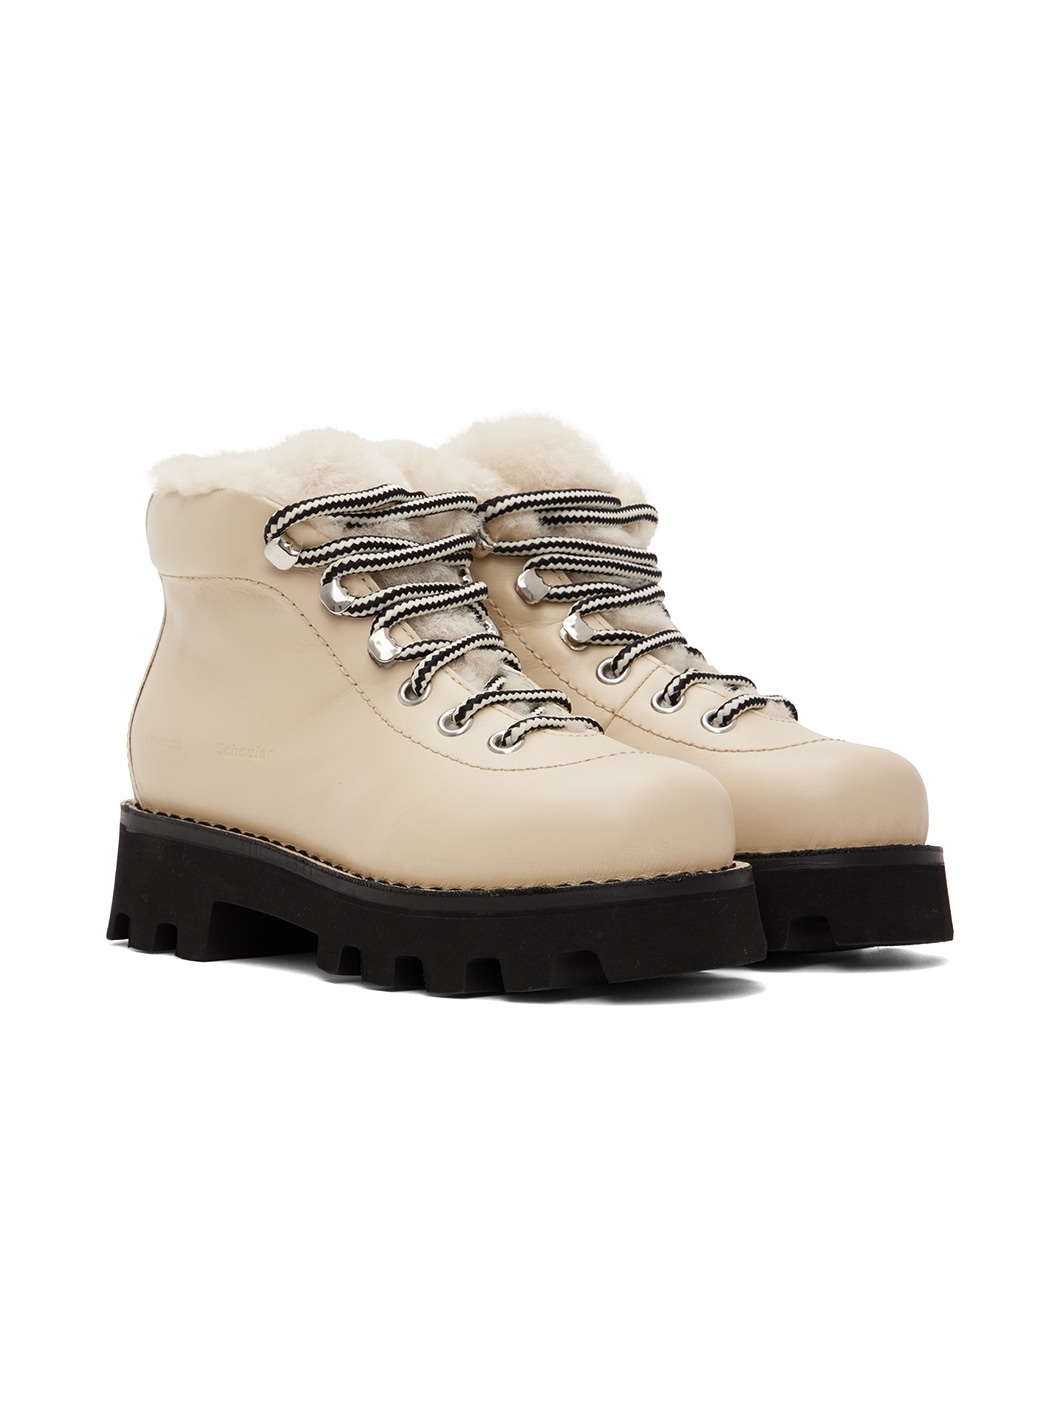 Beige Shearling Hiking Boots - 4